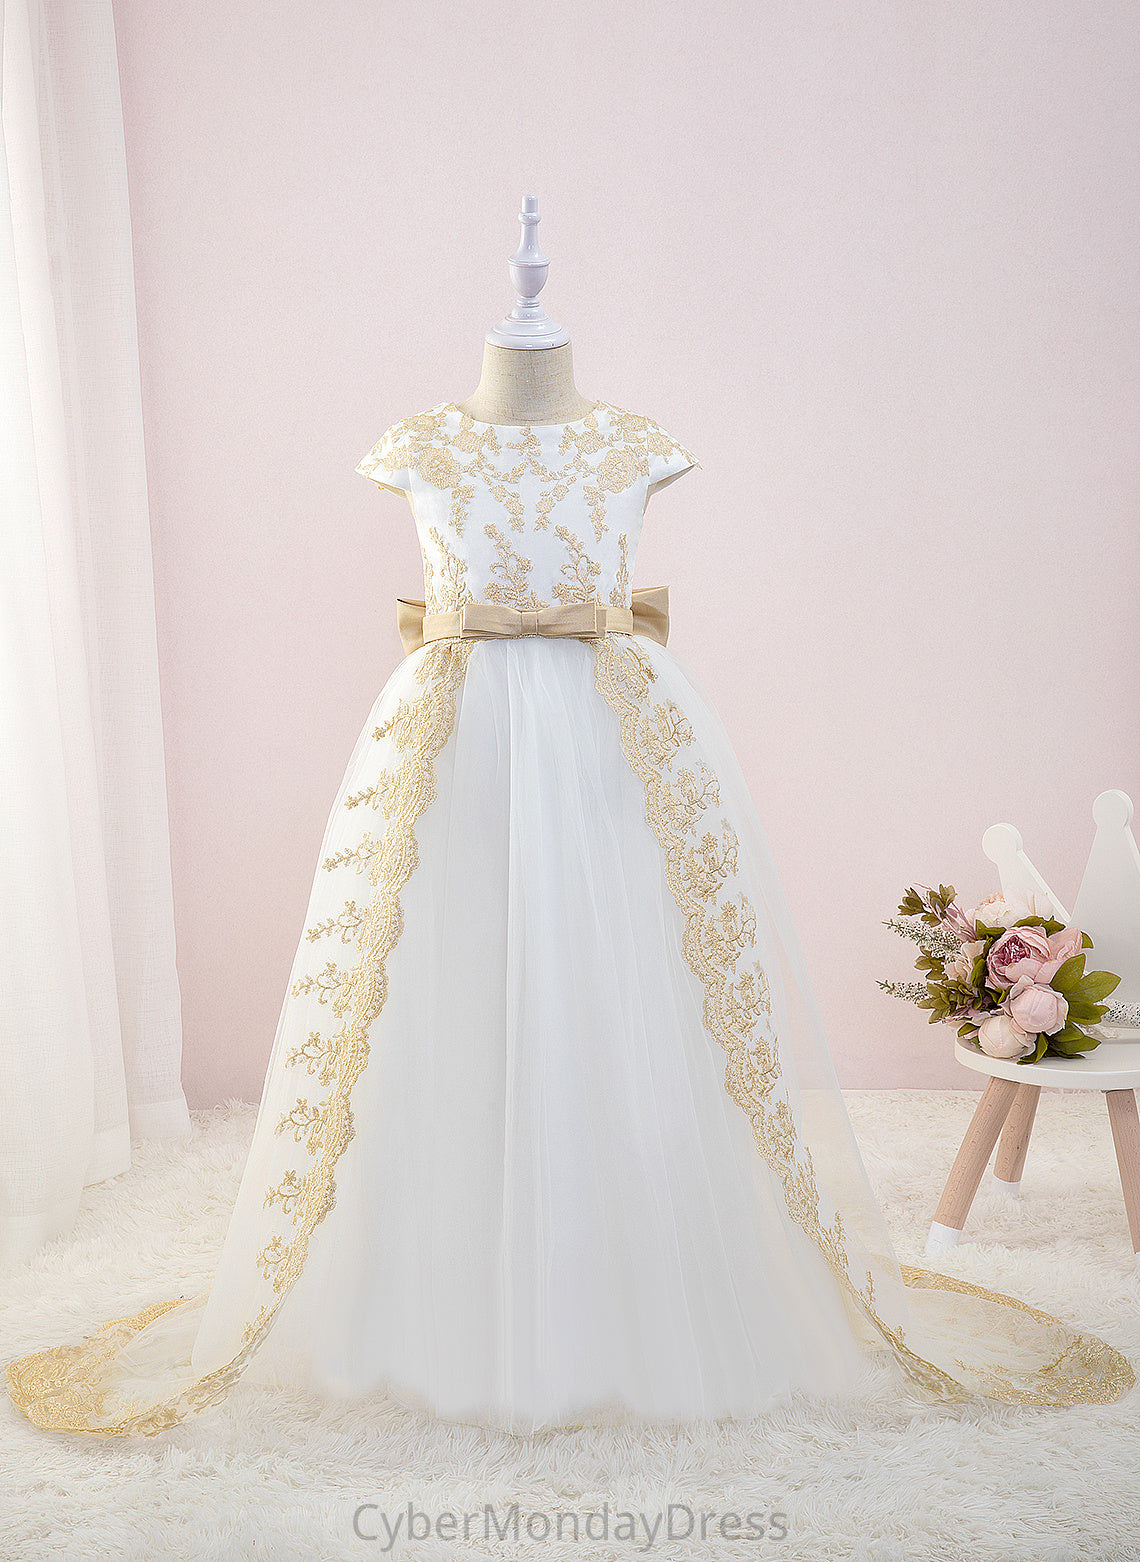 With Court Tulle/Lace Ball-Gown/Princess Flower Girl Dresses Dress Scoop Flower Train - Girl Madeleine Sleeves Neck Short Bow(s)